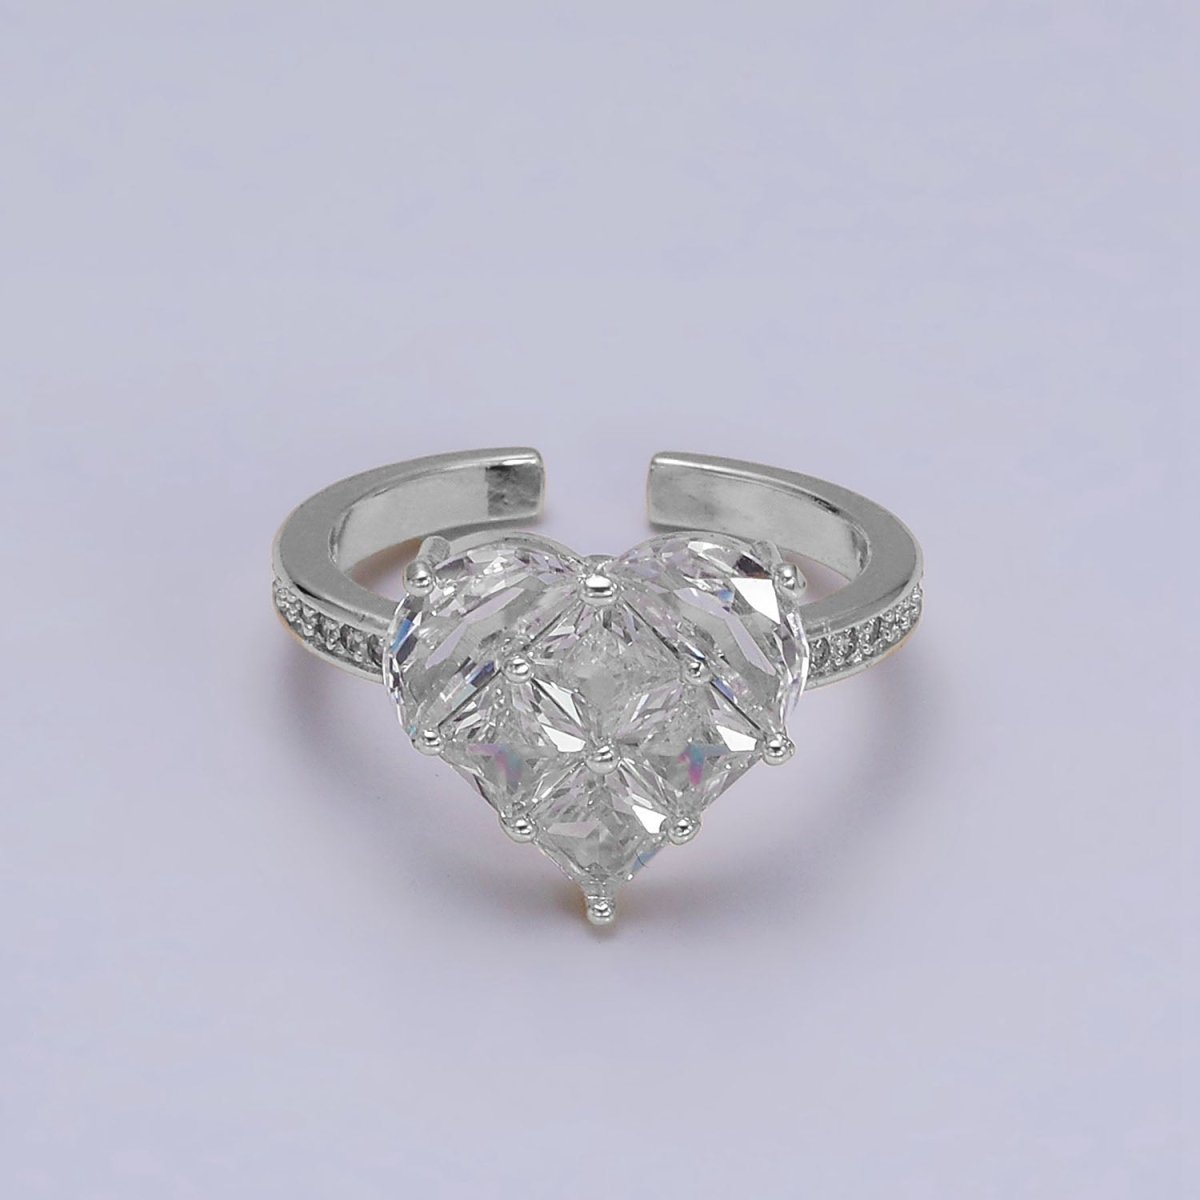 16K Gold Filled Clear Heart CZ Micro Paved Adjustable Ring in Gold & Silver | O-1597 O-1598 - DLUXCA